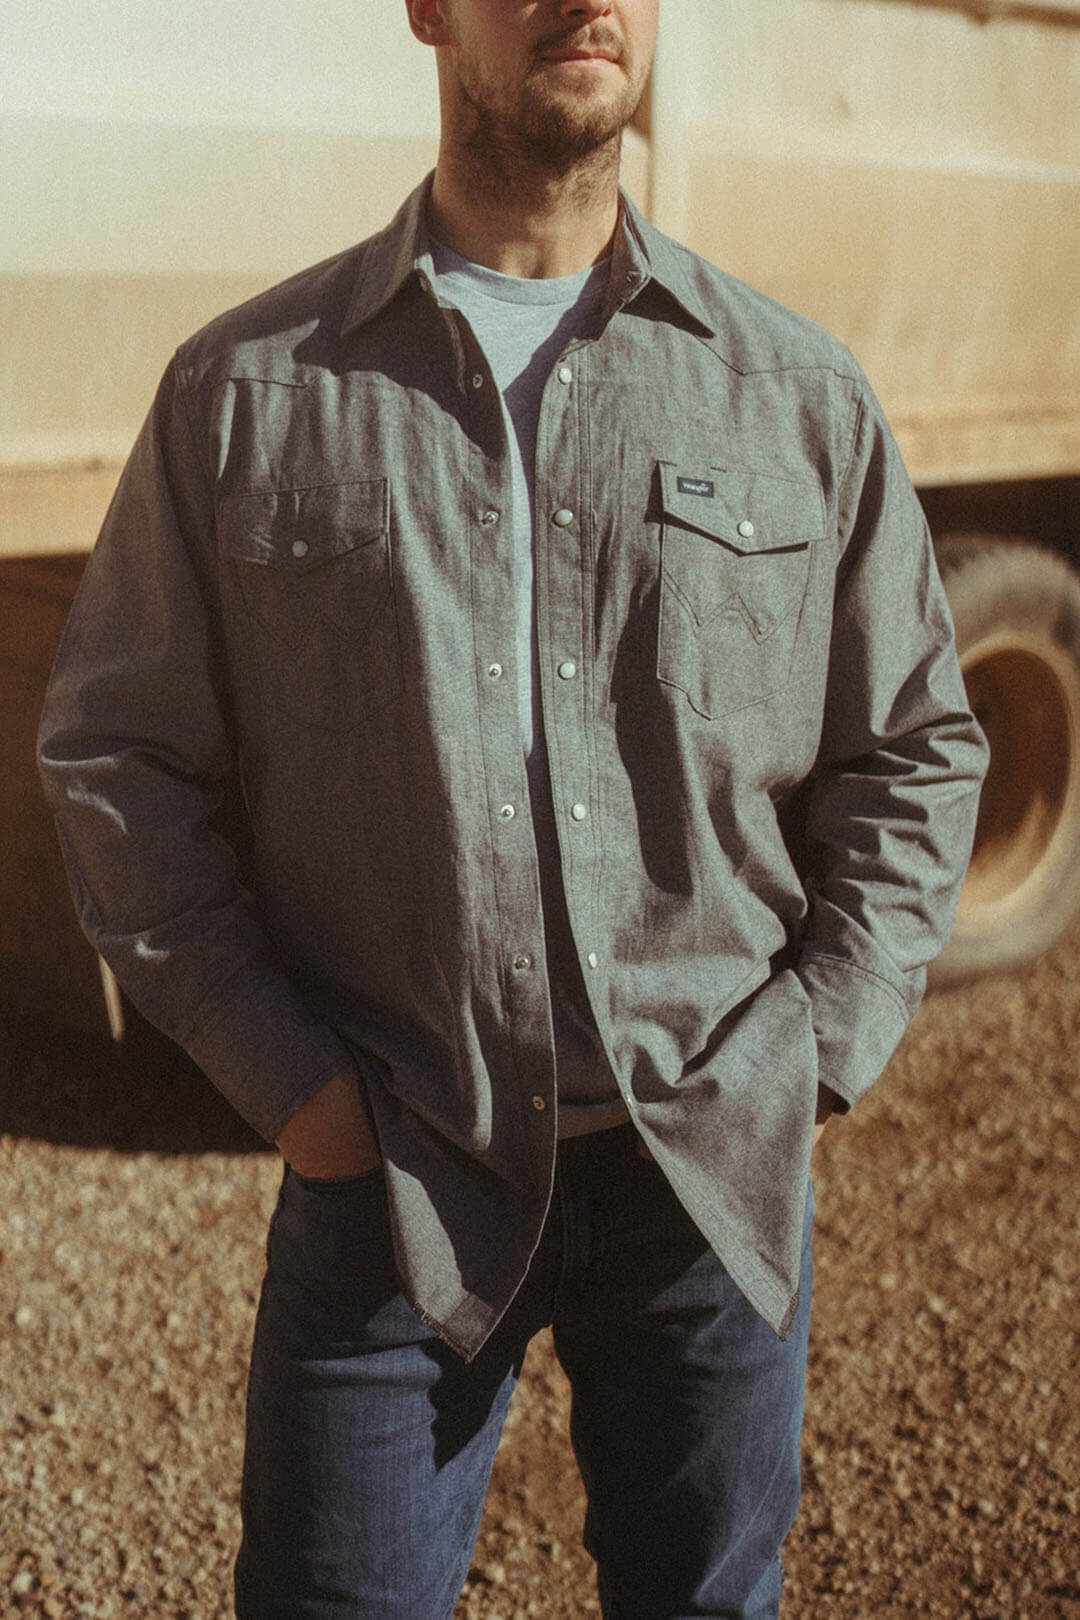 Man modeling the Gray Wrangler Pearl Snap Shirt featuring 2 front chest pearl snap pockets.